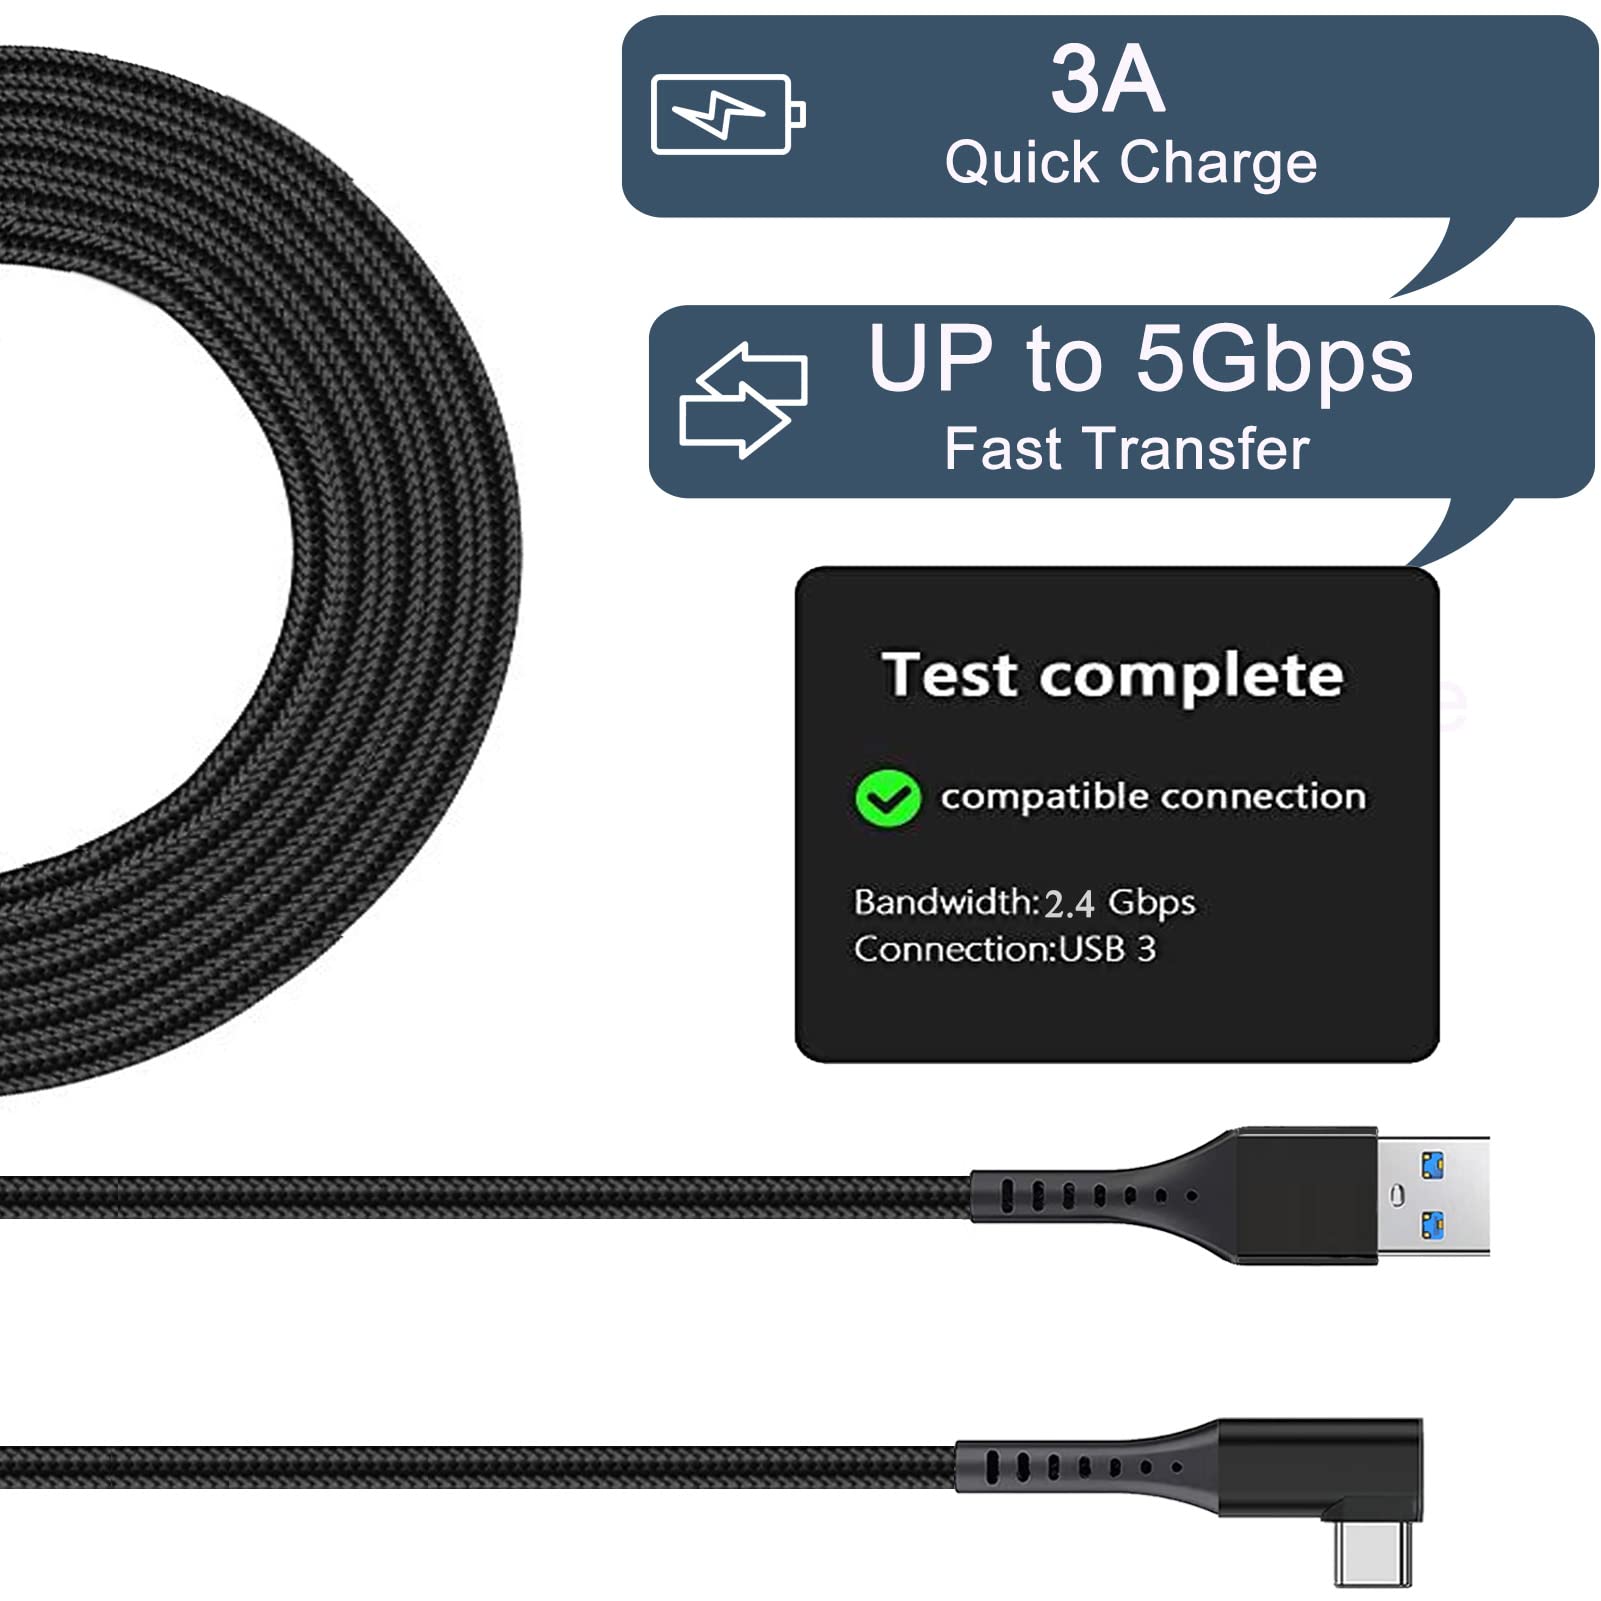 JAMYOK Link Cable 16 FT Compatible with Oculus/Meta Quest 2,VR Cable Compatible for Oculus/Meta Quest 2/1 Headset,USB 3.0 A to C,High Speed Data Transfer & Fast Charging,Durable Nylon Braided